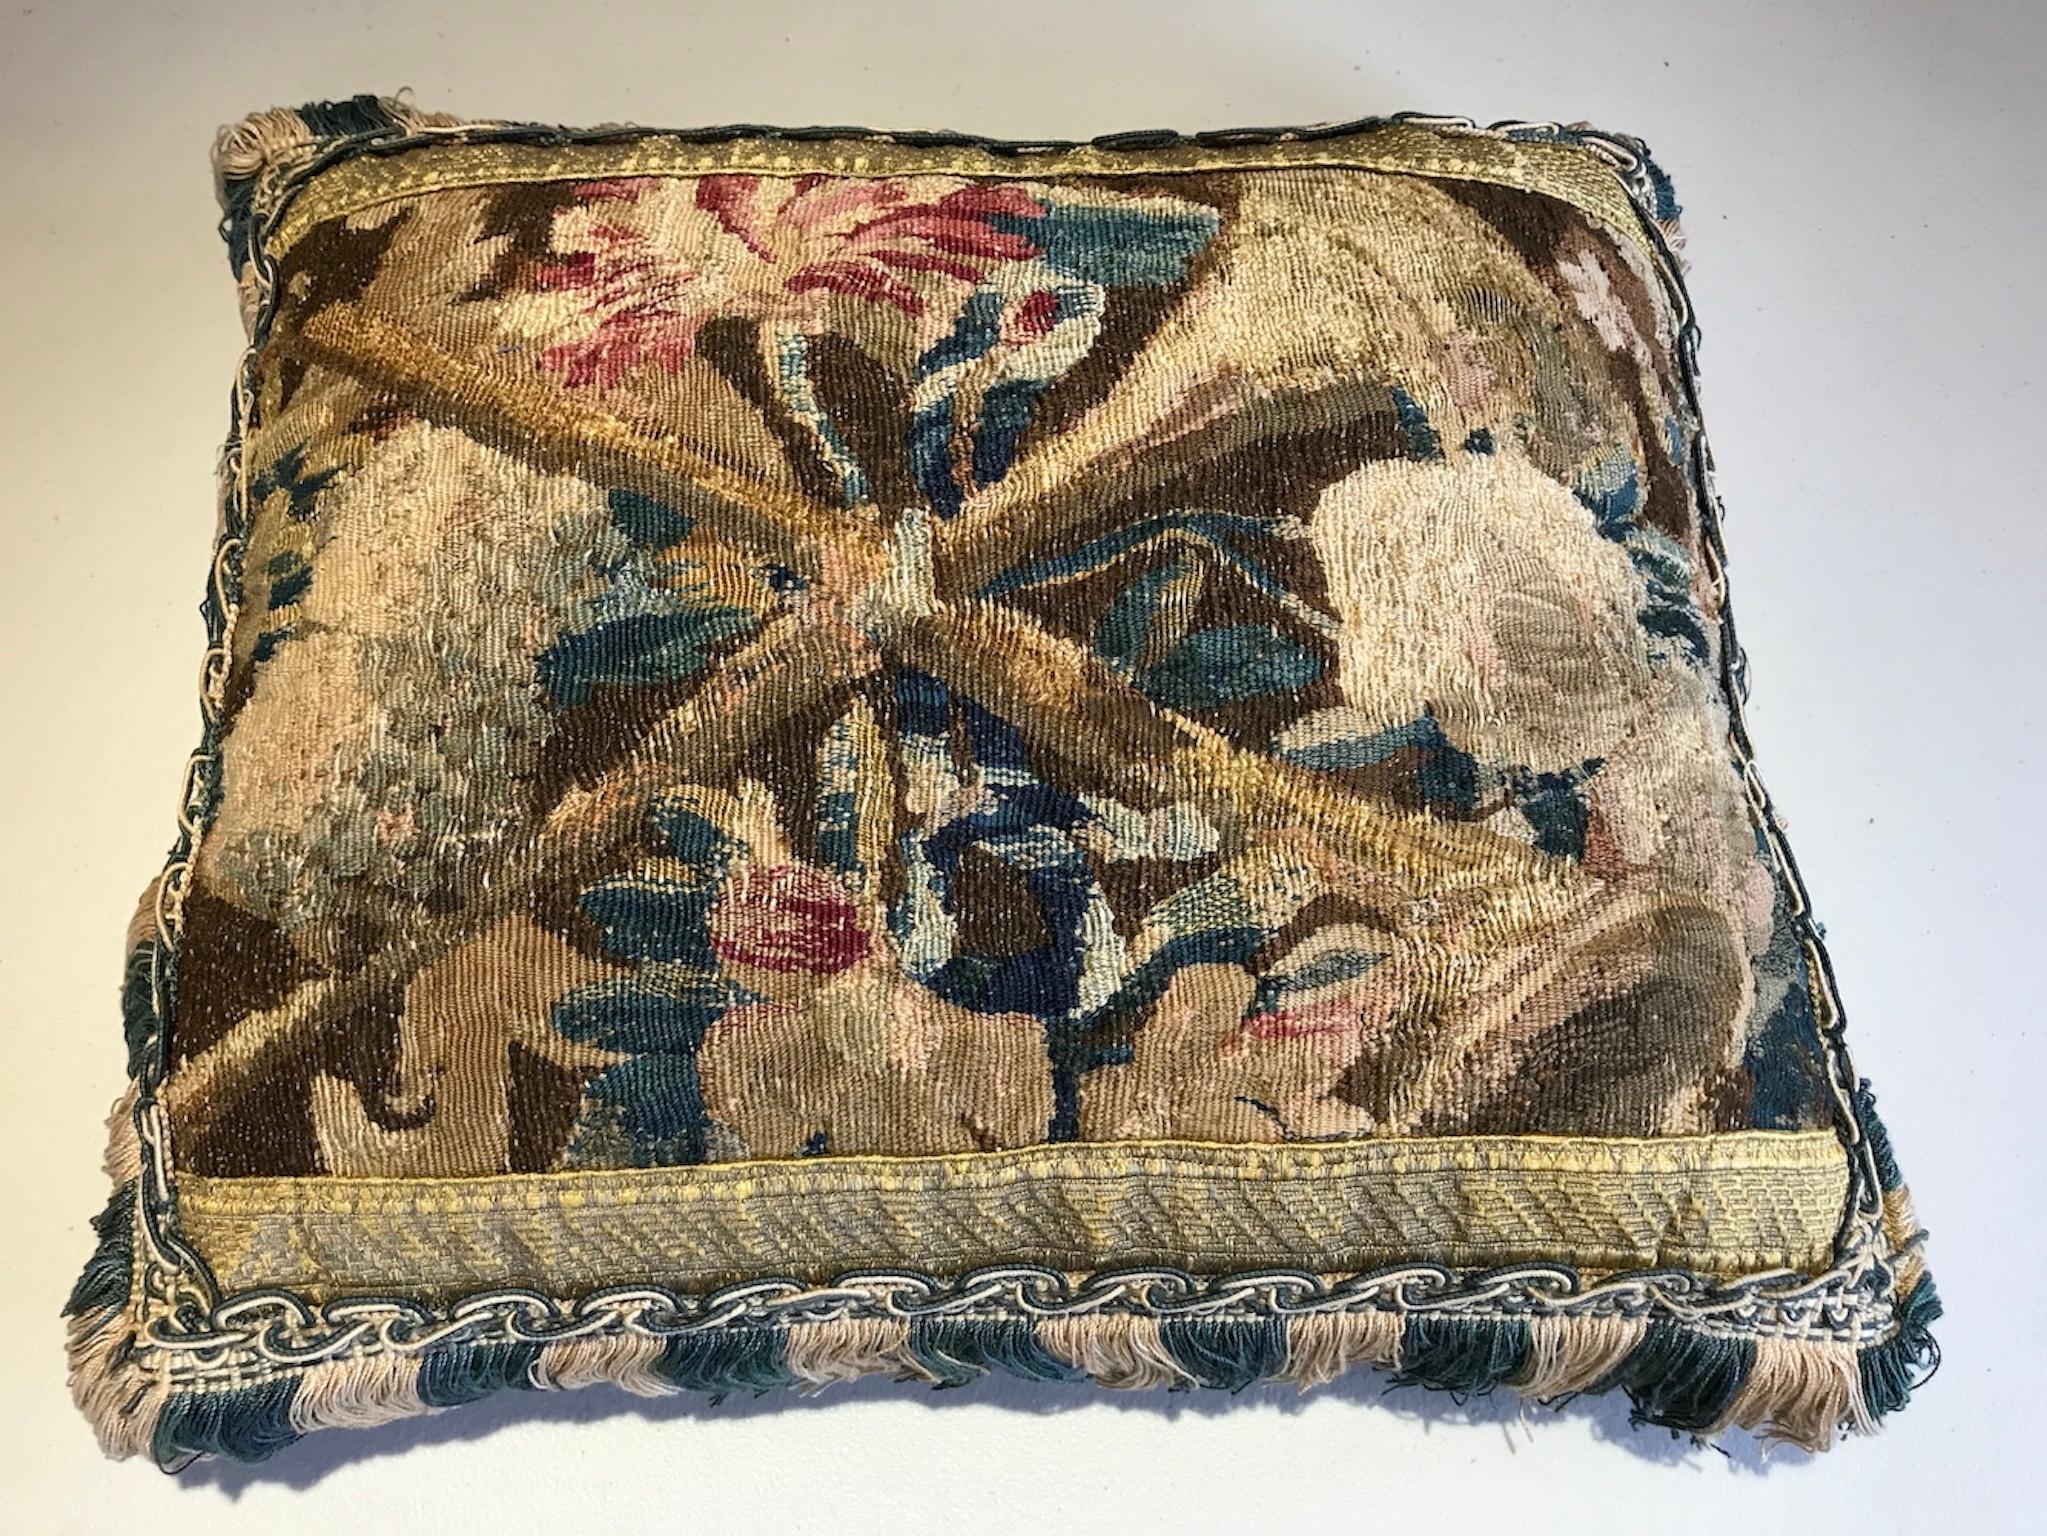 A pair of pillows made from fragments of fine mid-17th century Brussels tapestry depicting fruit and flowers. Faced with gold braid and a two tone silk fringe. i am asking £3,000 for the pair

Measures: length 34cm
Height 39cm
Depth 11cm
Fringe